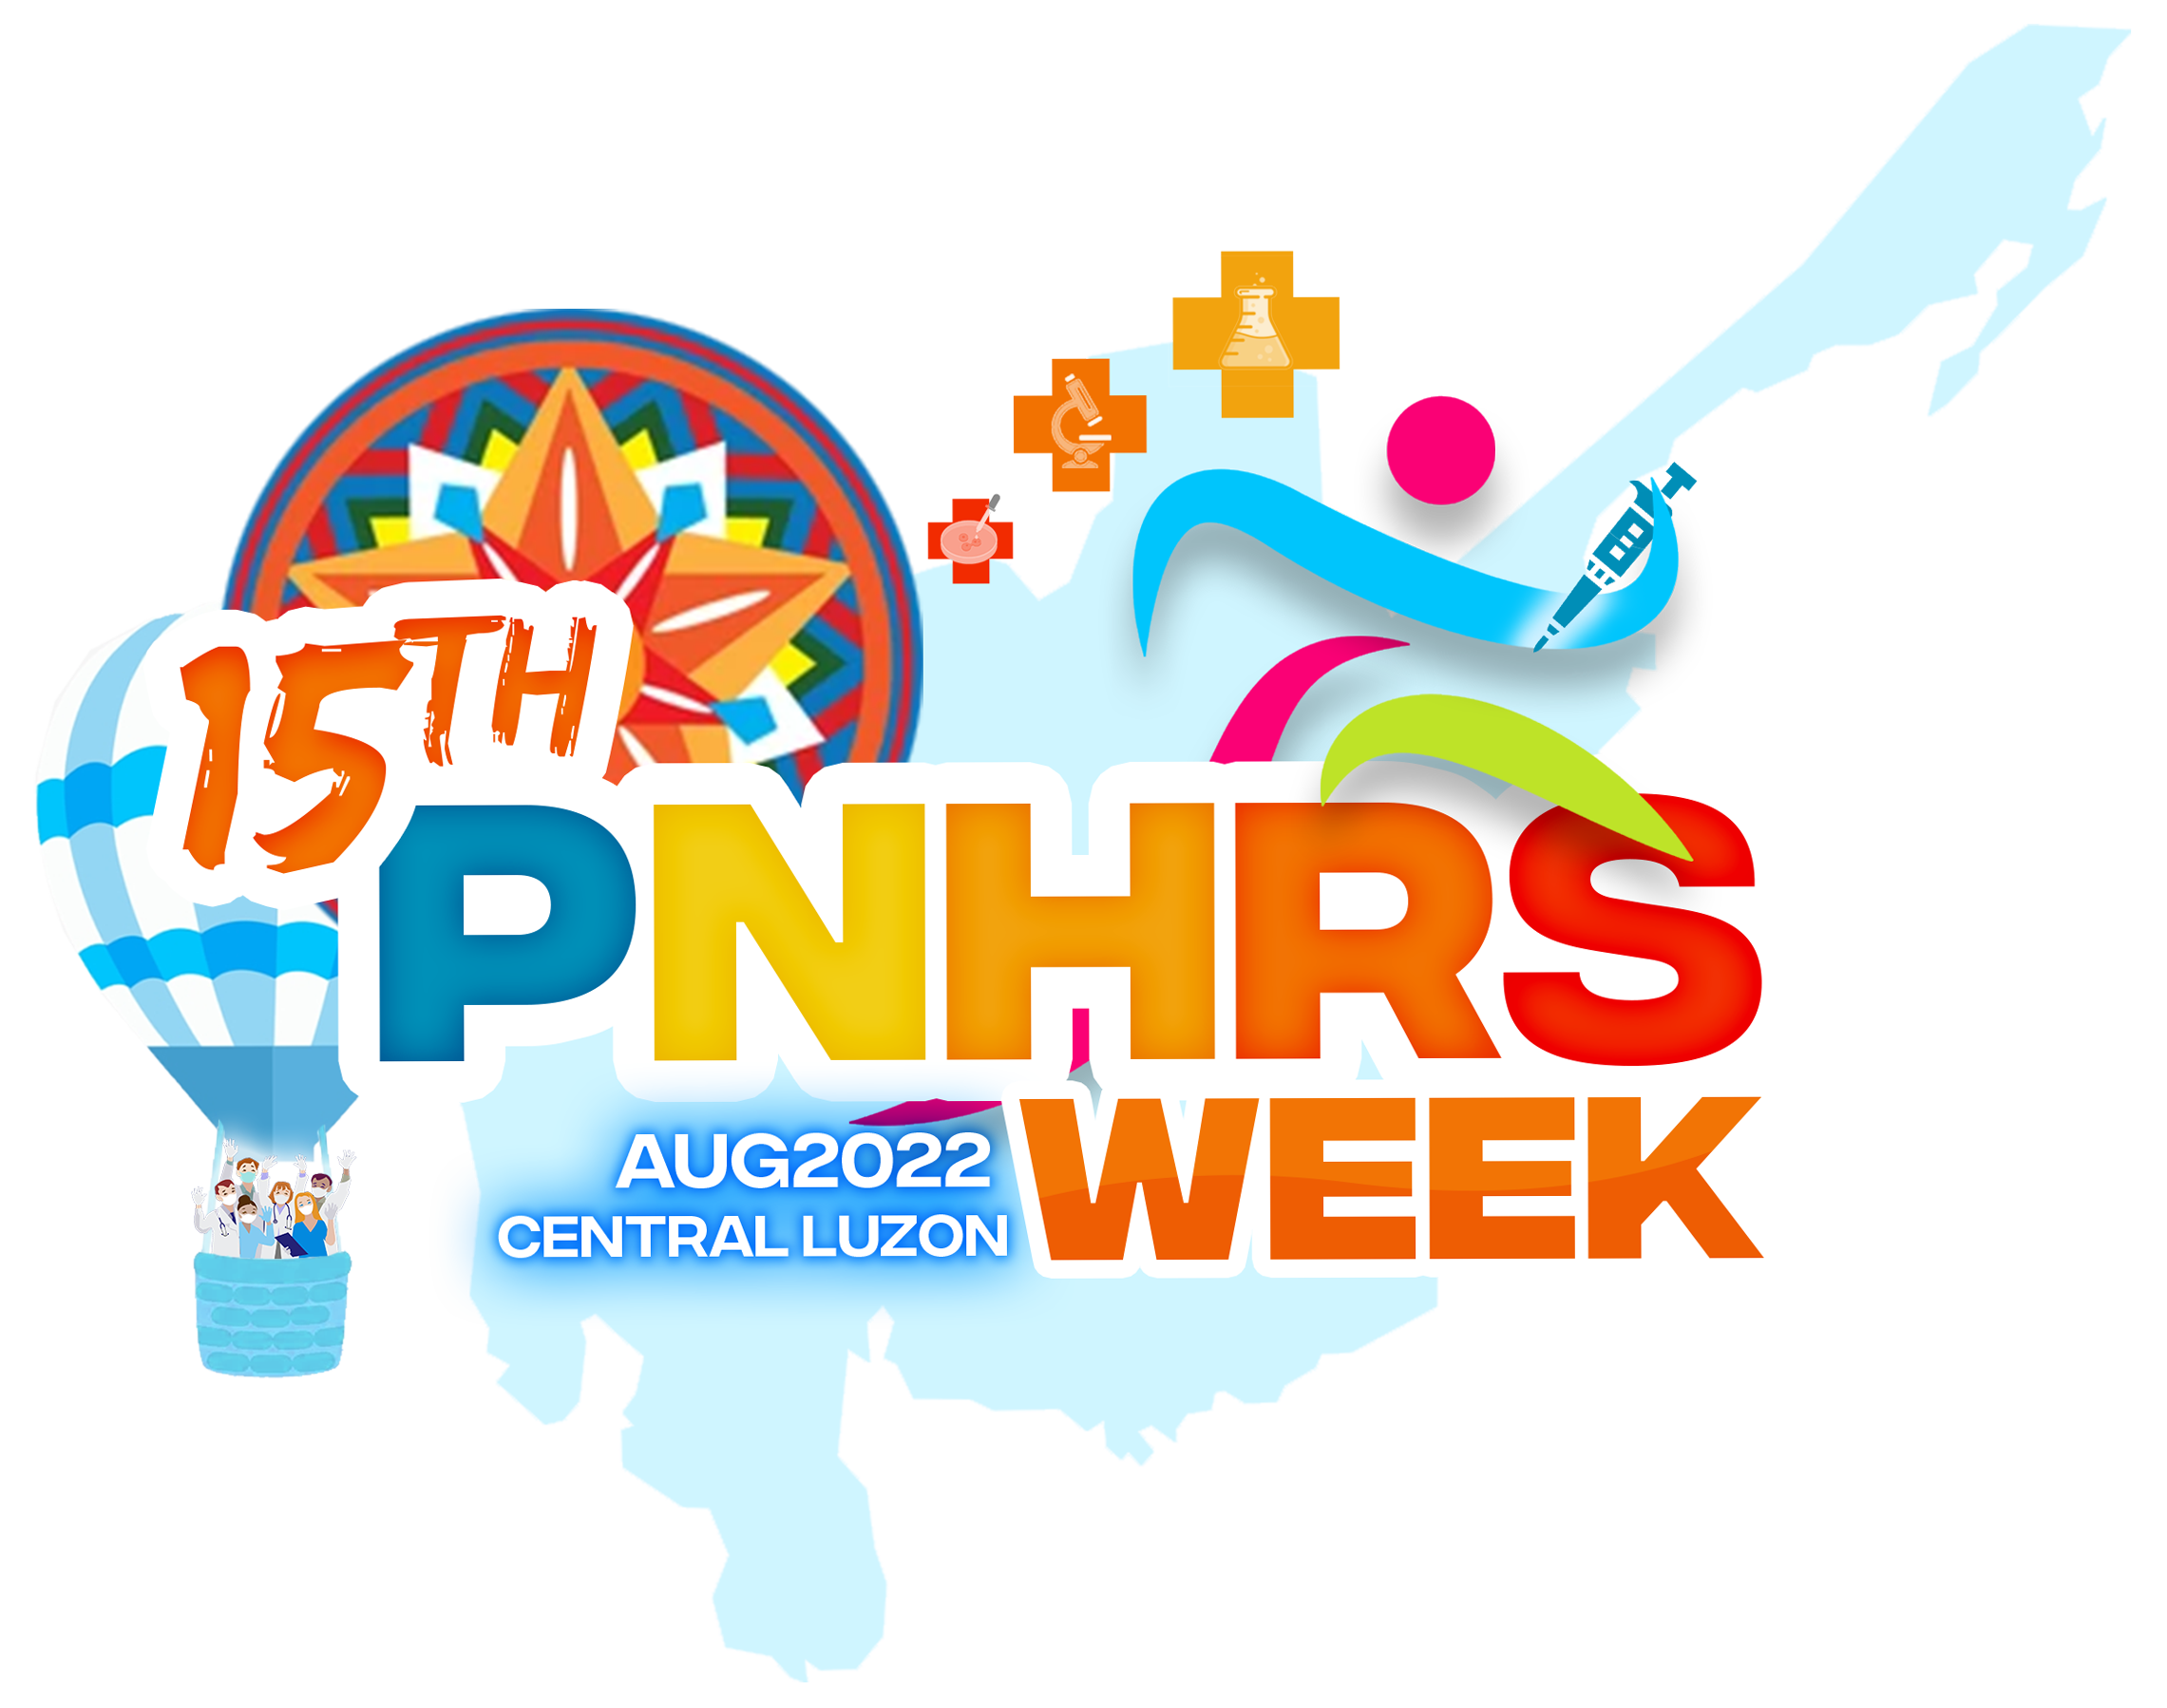 Central Luzon to host 15th PNHRS Week